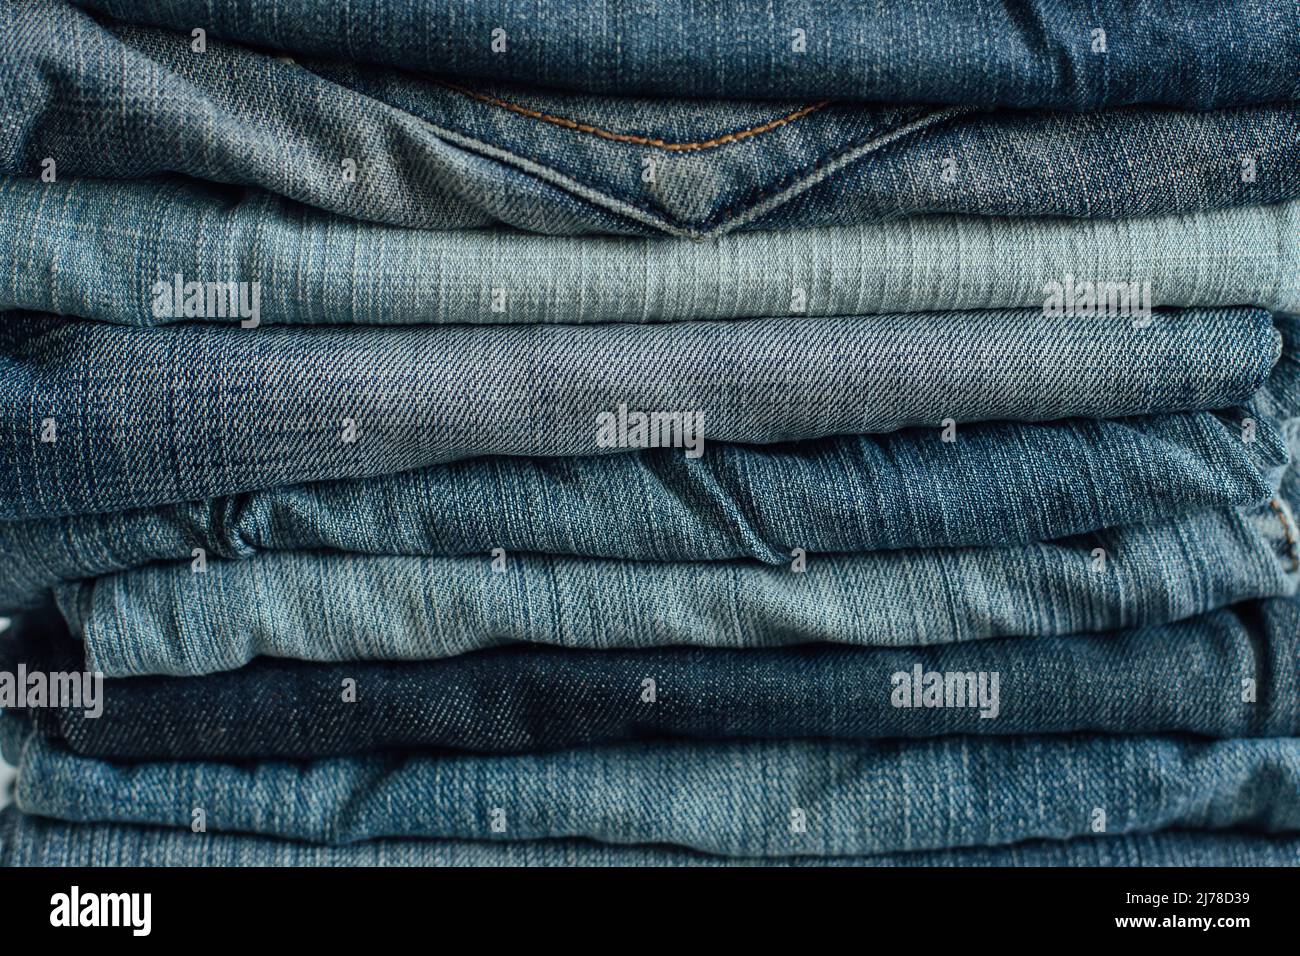 Stack of a stack of old jeans various shades of blue jeans. Denim jeans ...